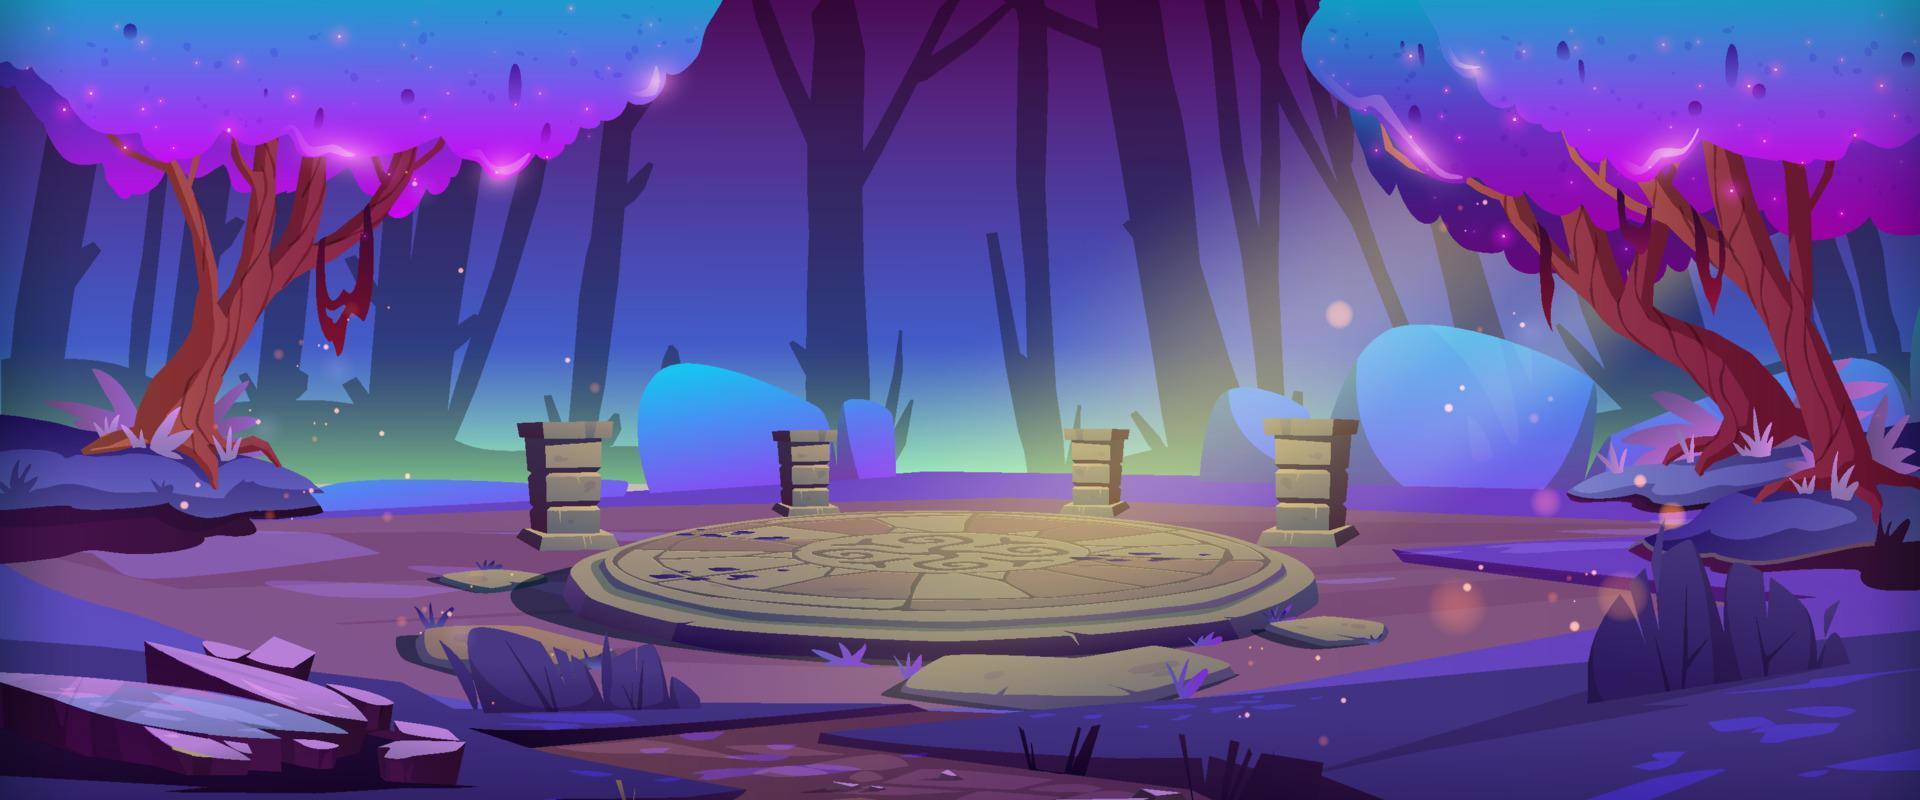 Magic forest with round stone altar at night vector